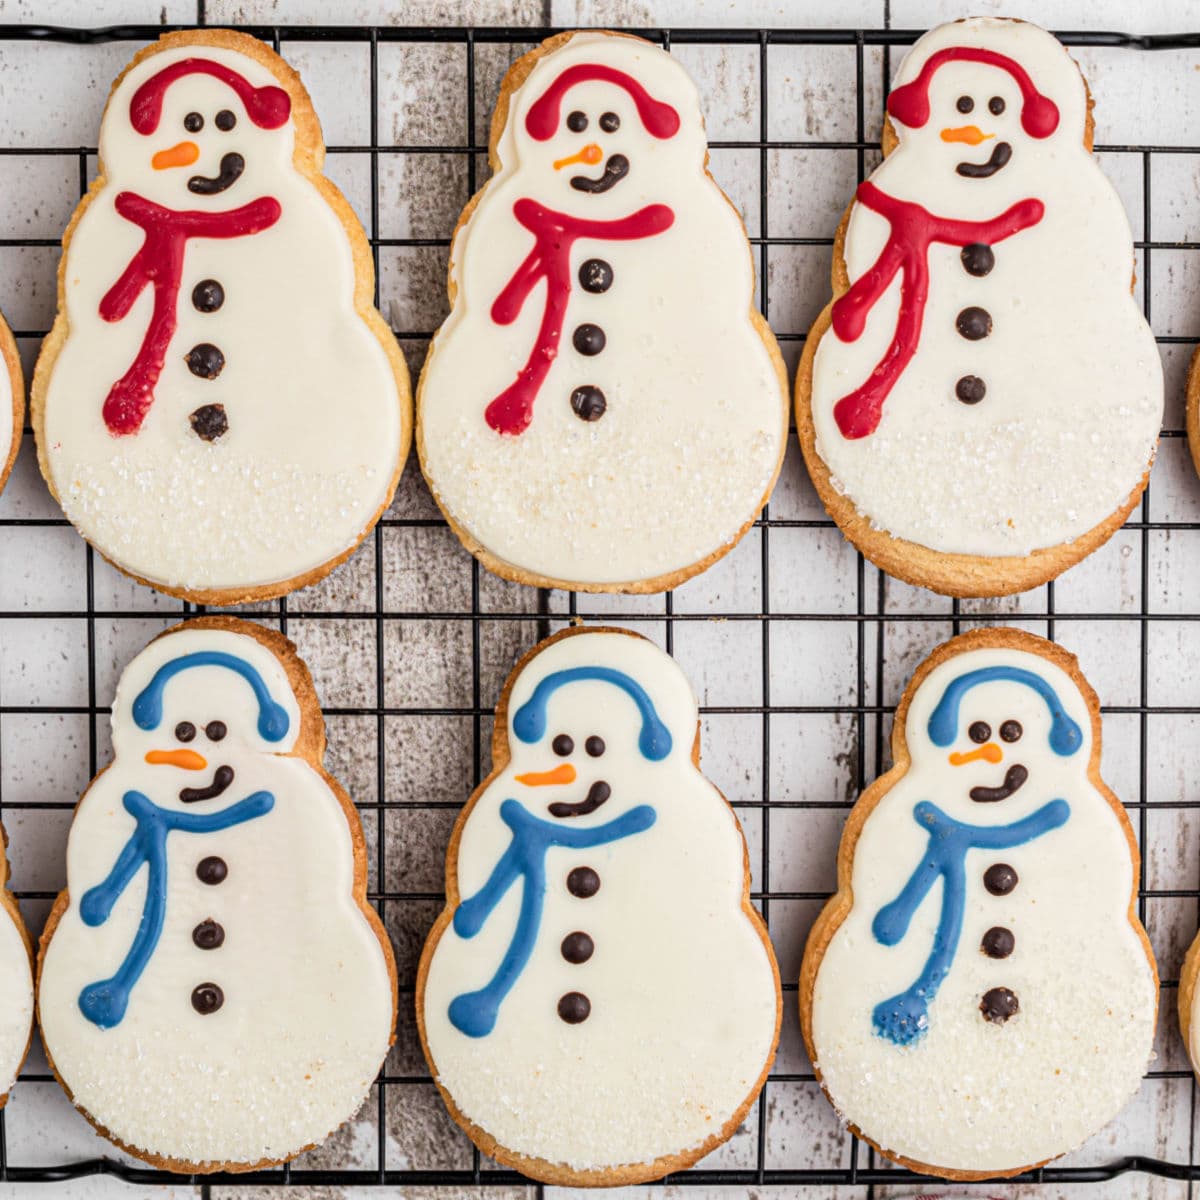 Snowman Cake - Cookies and Cups